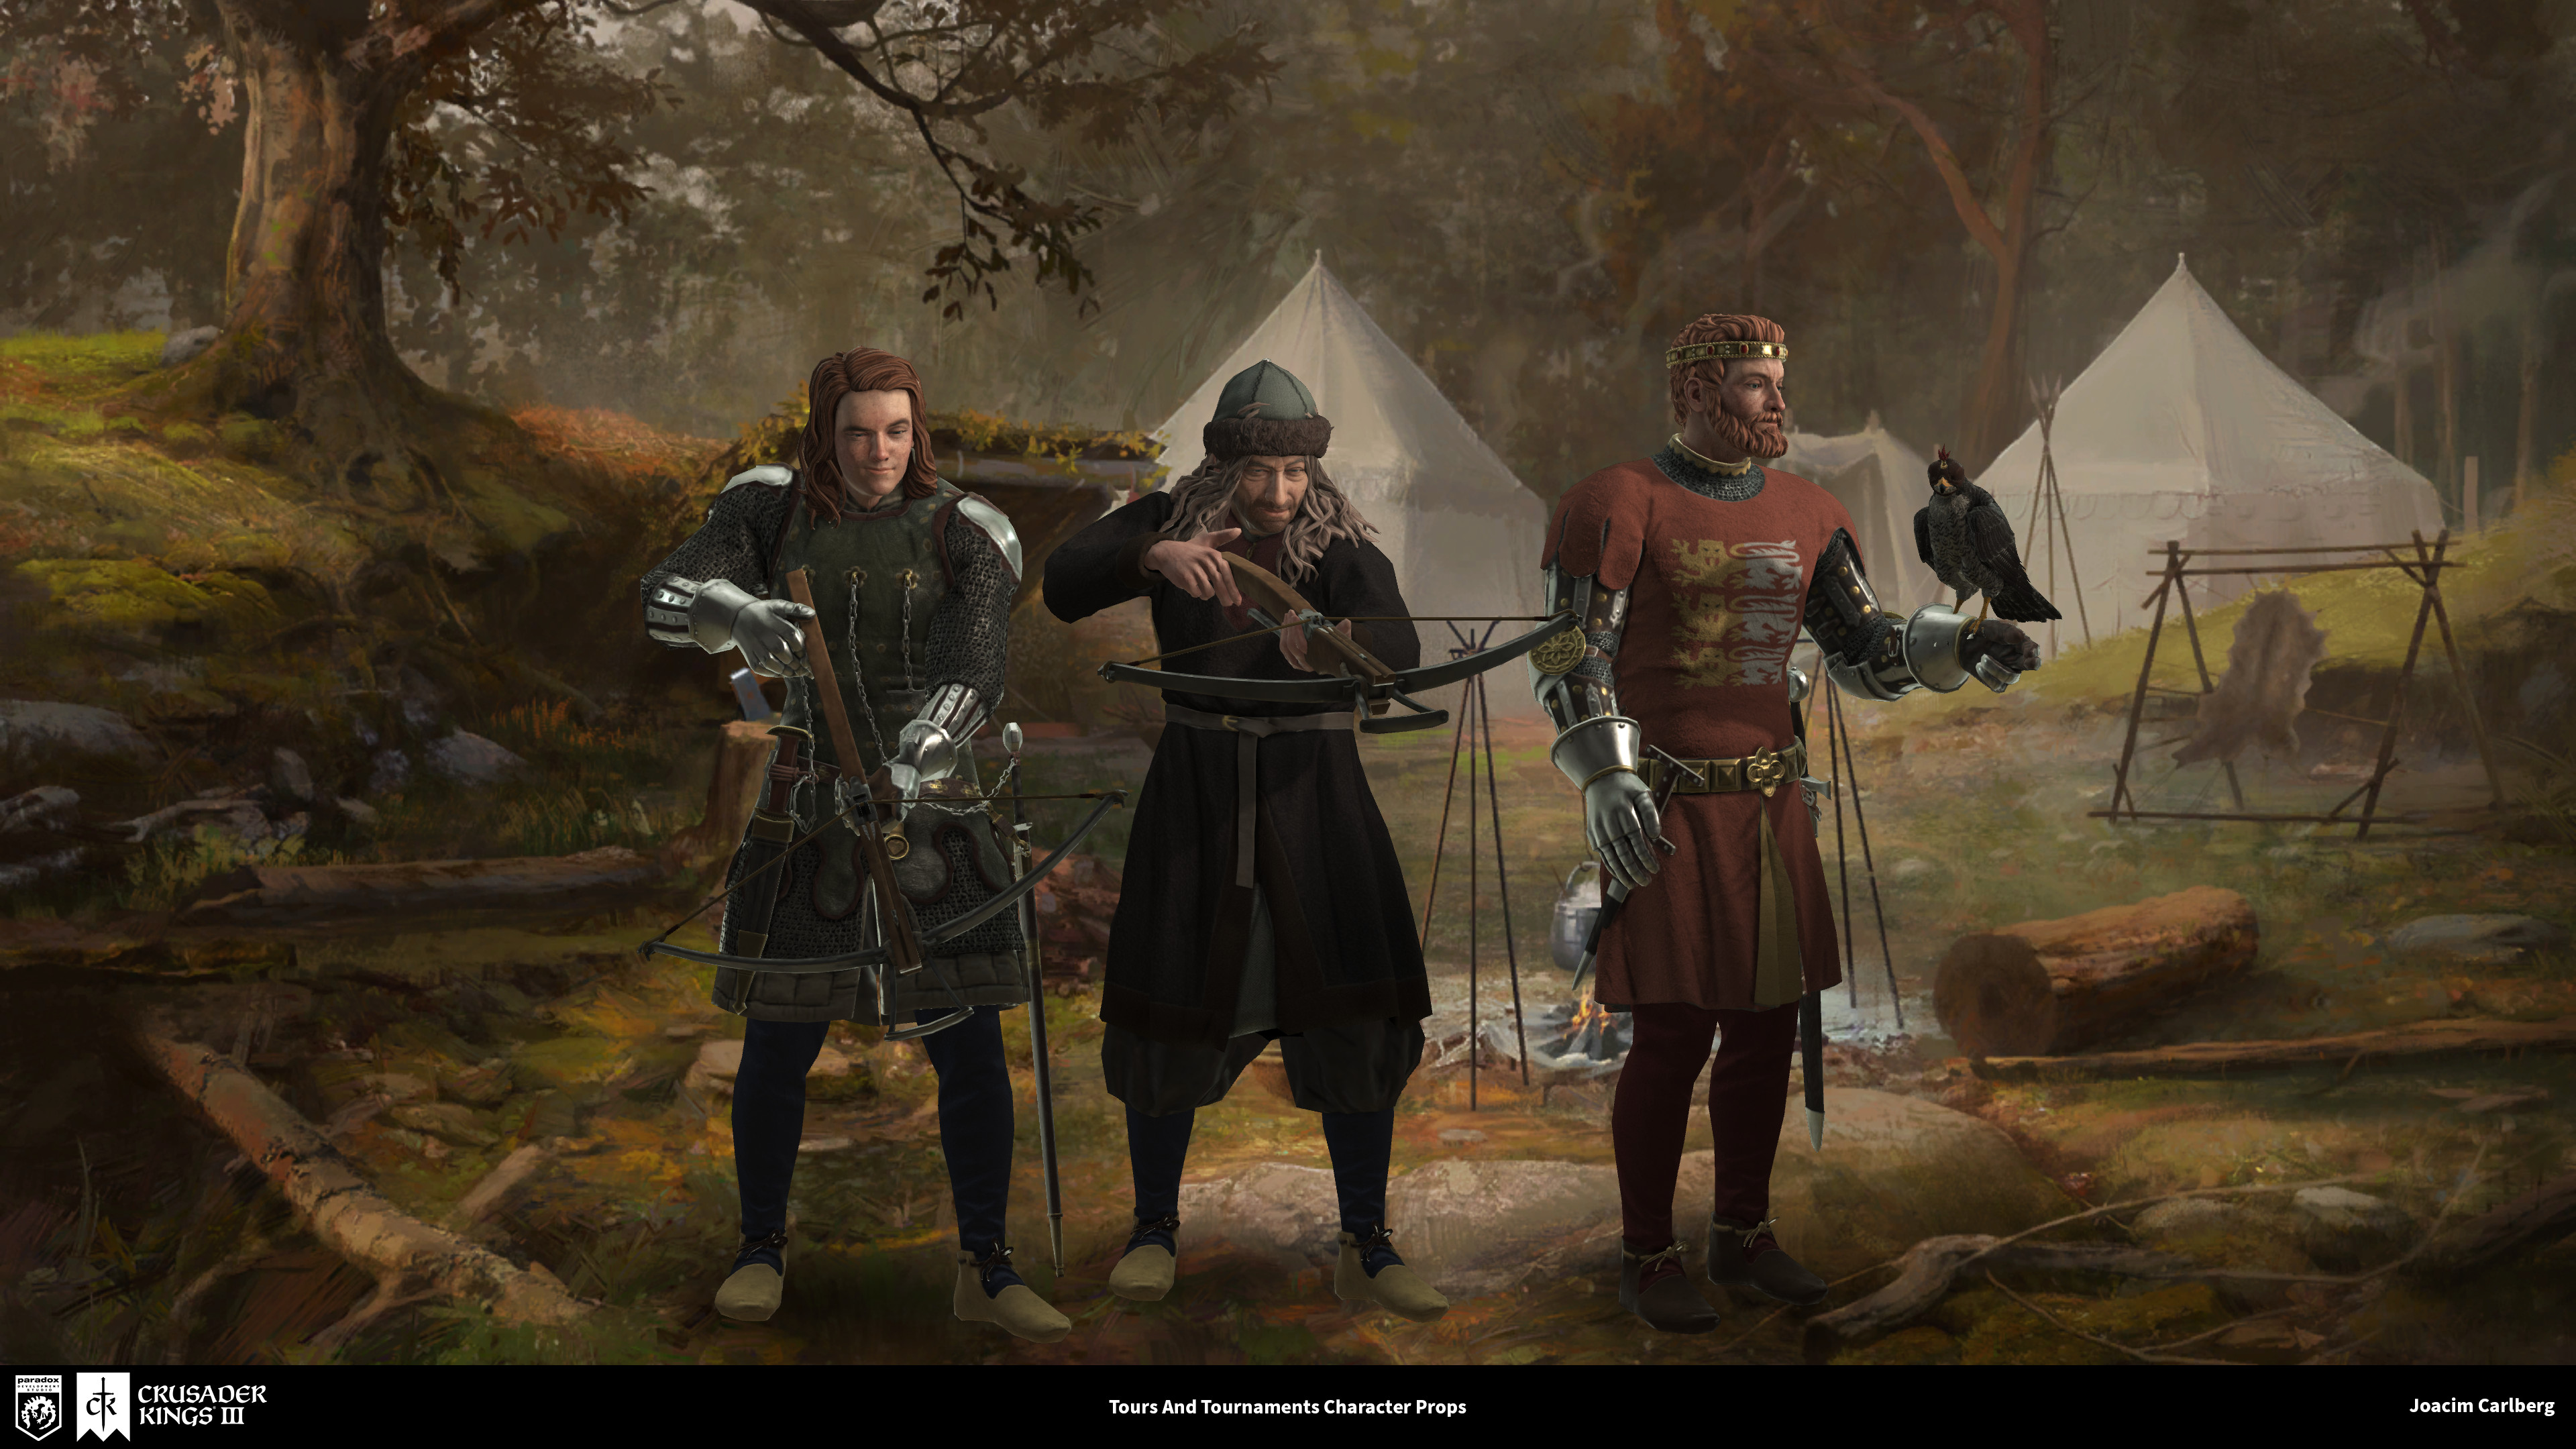 Paradox Explained Their Future Plans for Crusader Kings 3 - Games Lantern